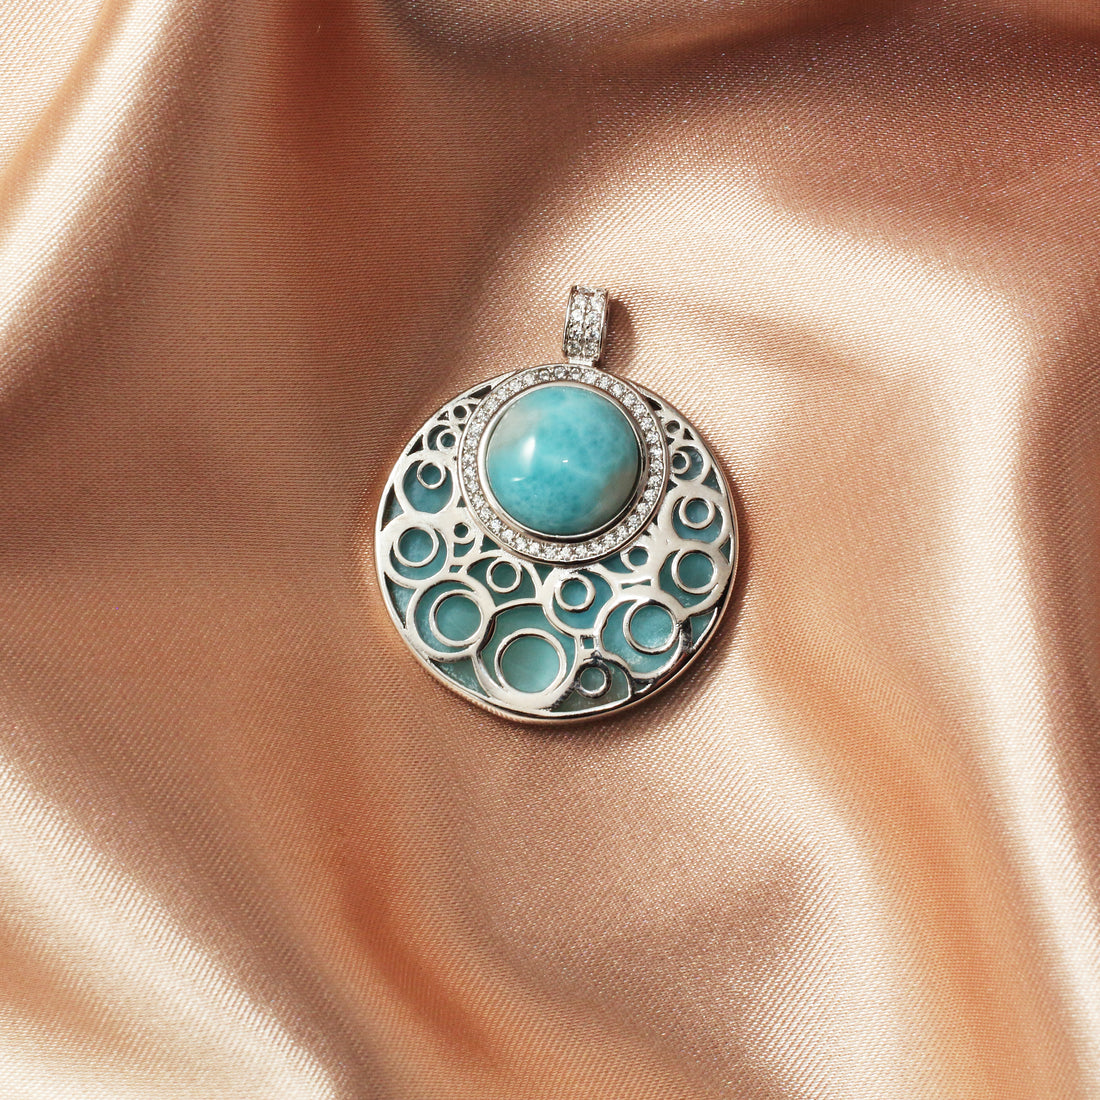 Captivating Beauty: The Allure of Silver Larimar Necklaces